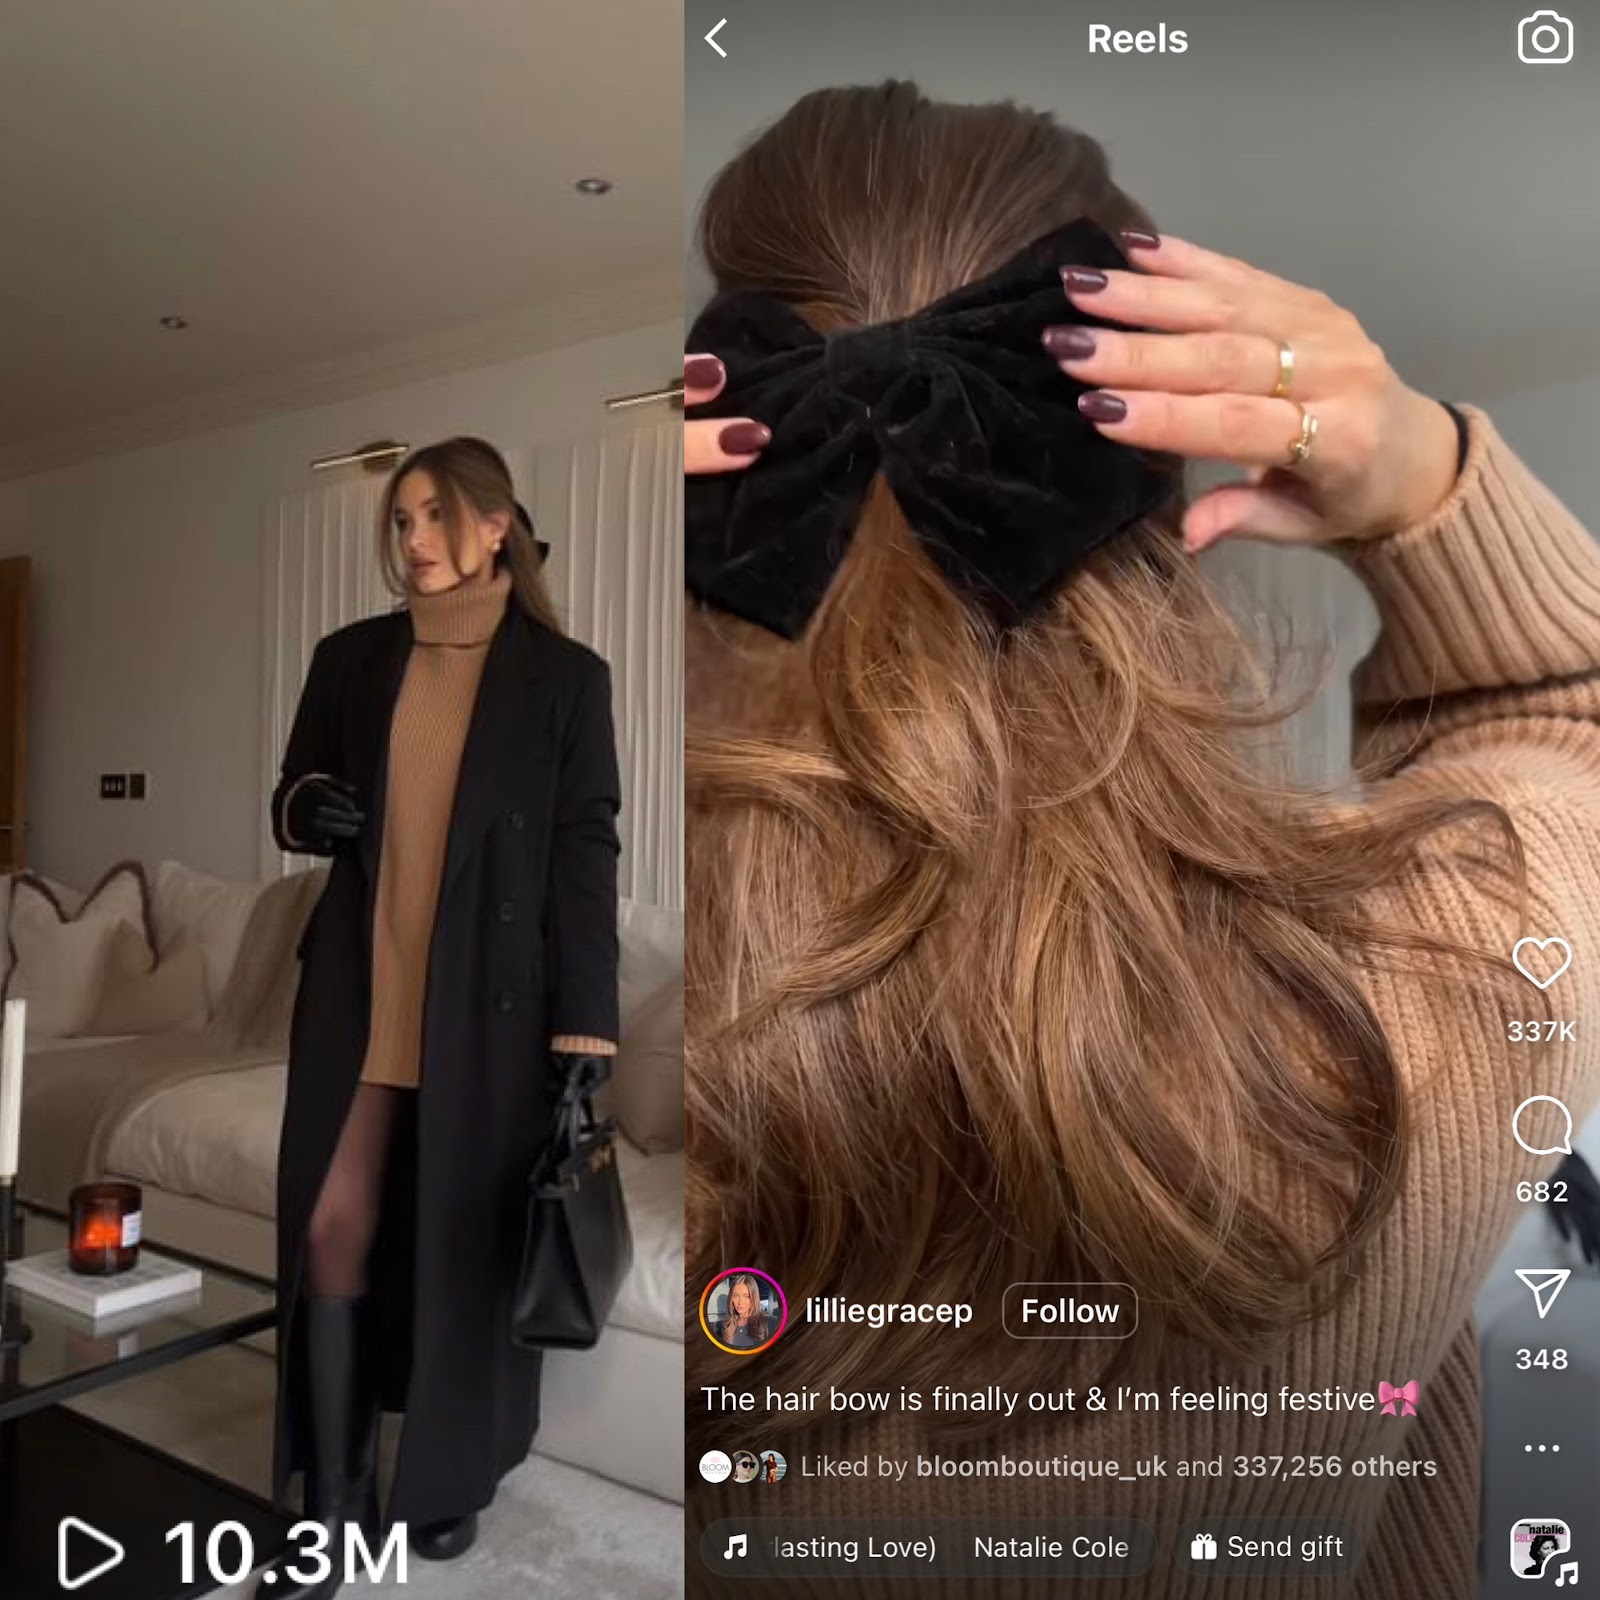 Create captions that enhance your Reels with additional context and emotion. Matching captions to the video content proves effective, evident in the following instances where Reels with aligned captions garnered 10.3 million and 1.3 million views on Instagram.